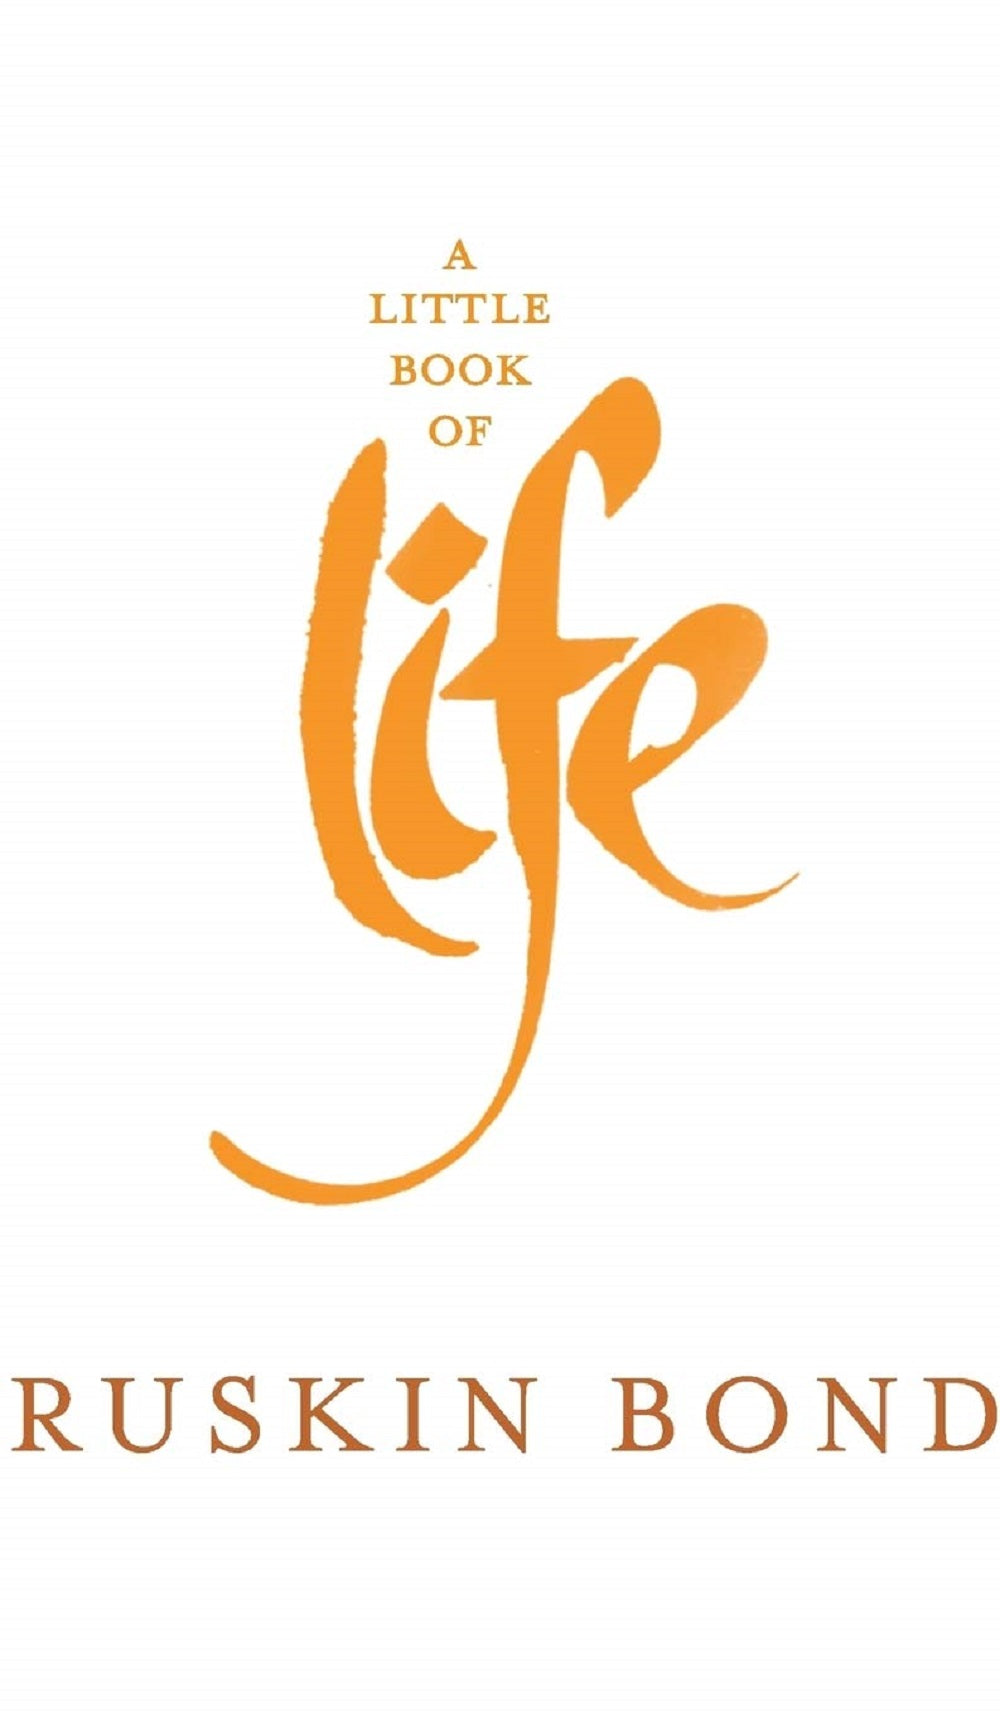 A LITTLE BOOK OF LIFE